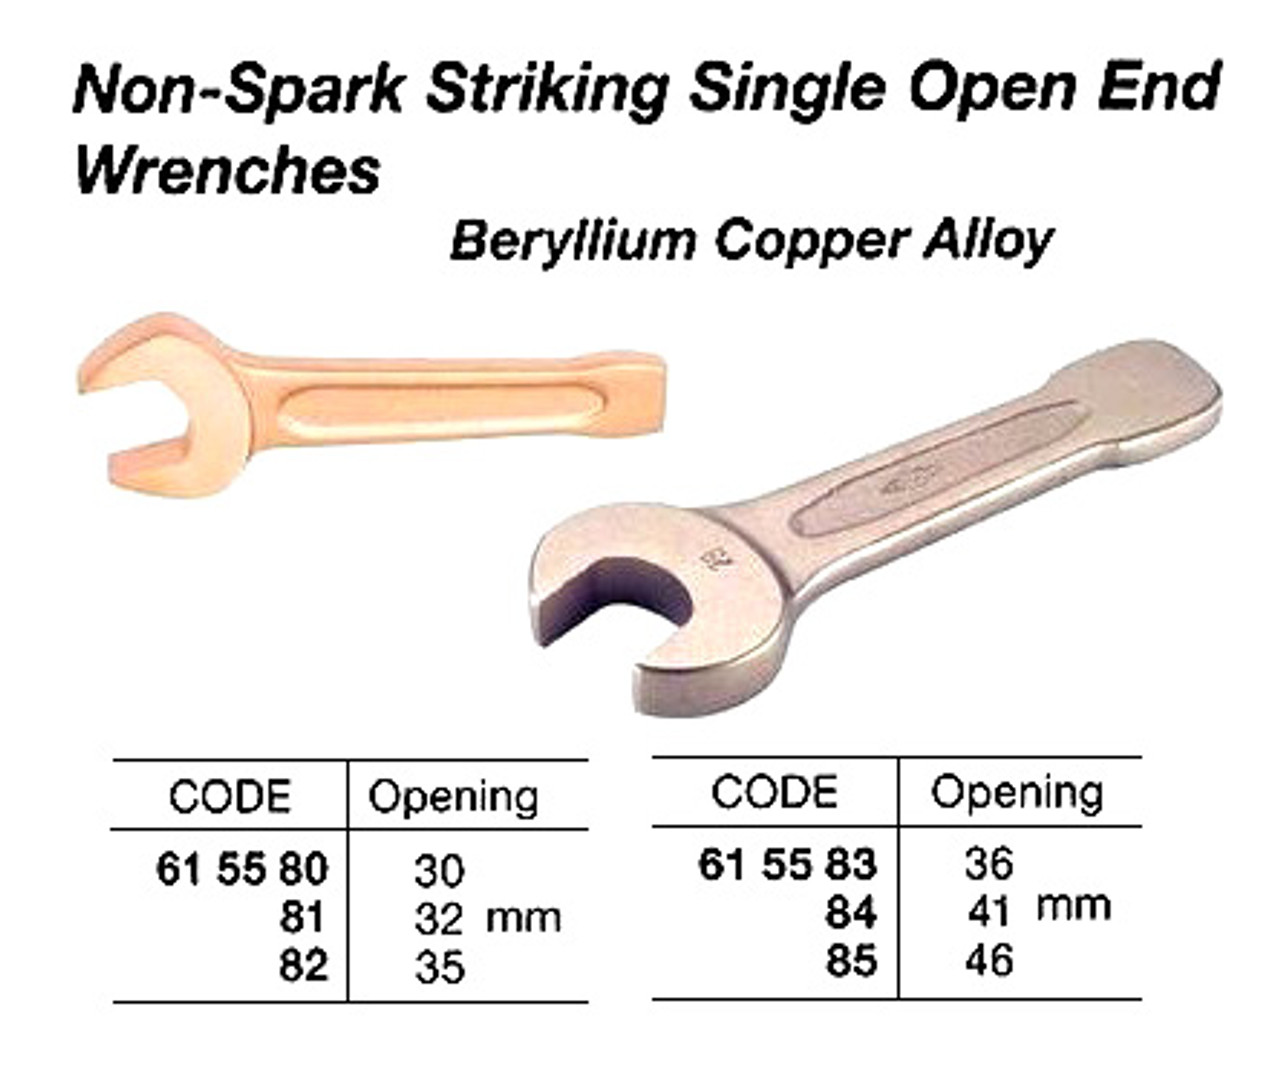 IMPA 615585 WRENCH STRIKING SINGLE OPEN 46mm BE-COPPER NON-SPARK